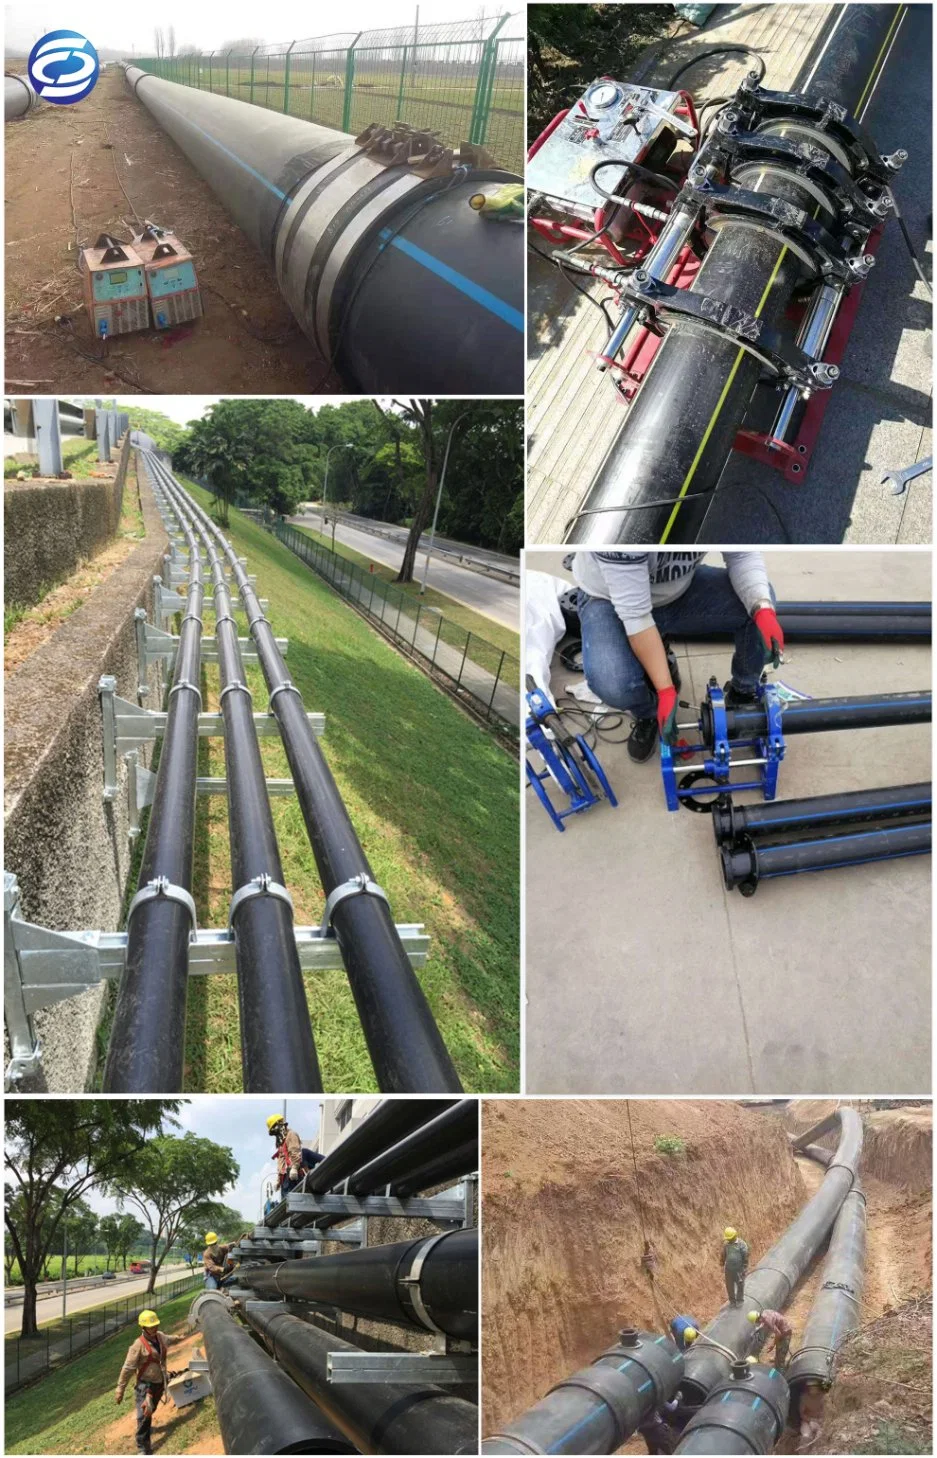 Polythene Pipe PE Pipe HDPE Pipe Plastic Pipe Plastic Tube Water Pipe for Water Work Mining Irrigation gasoline